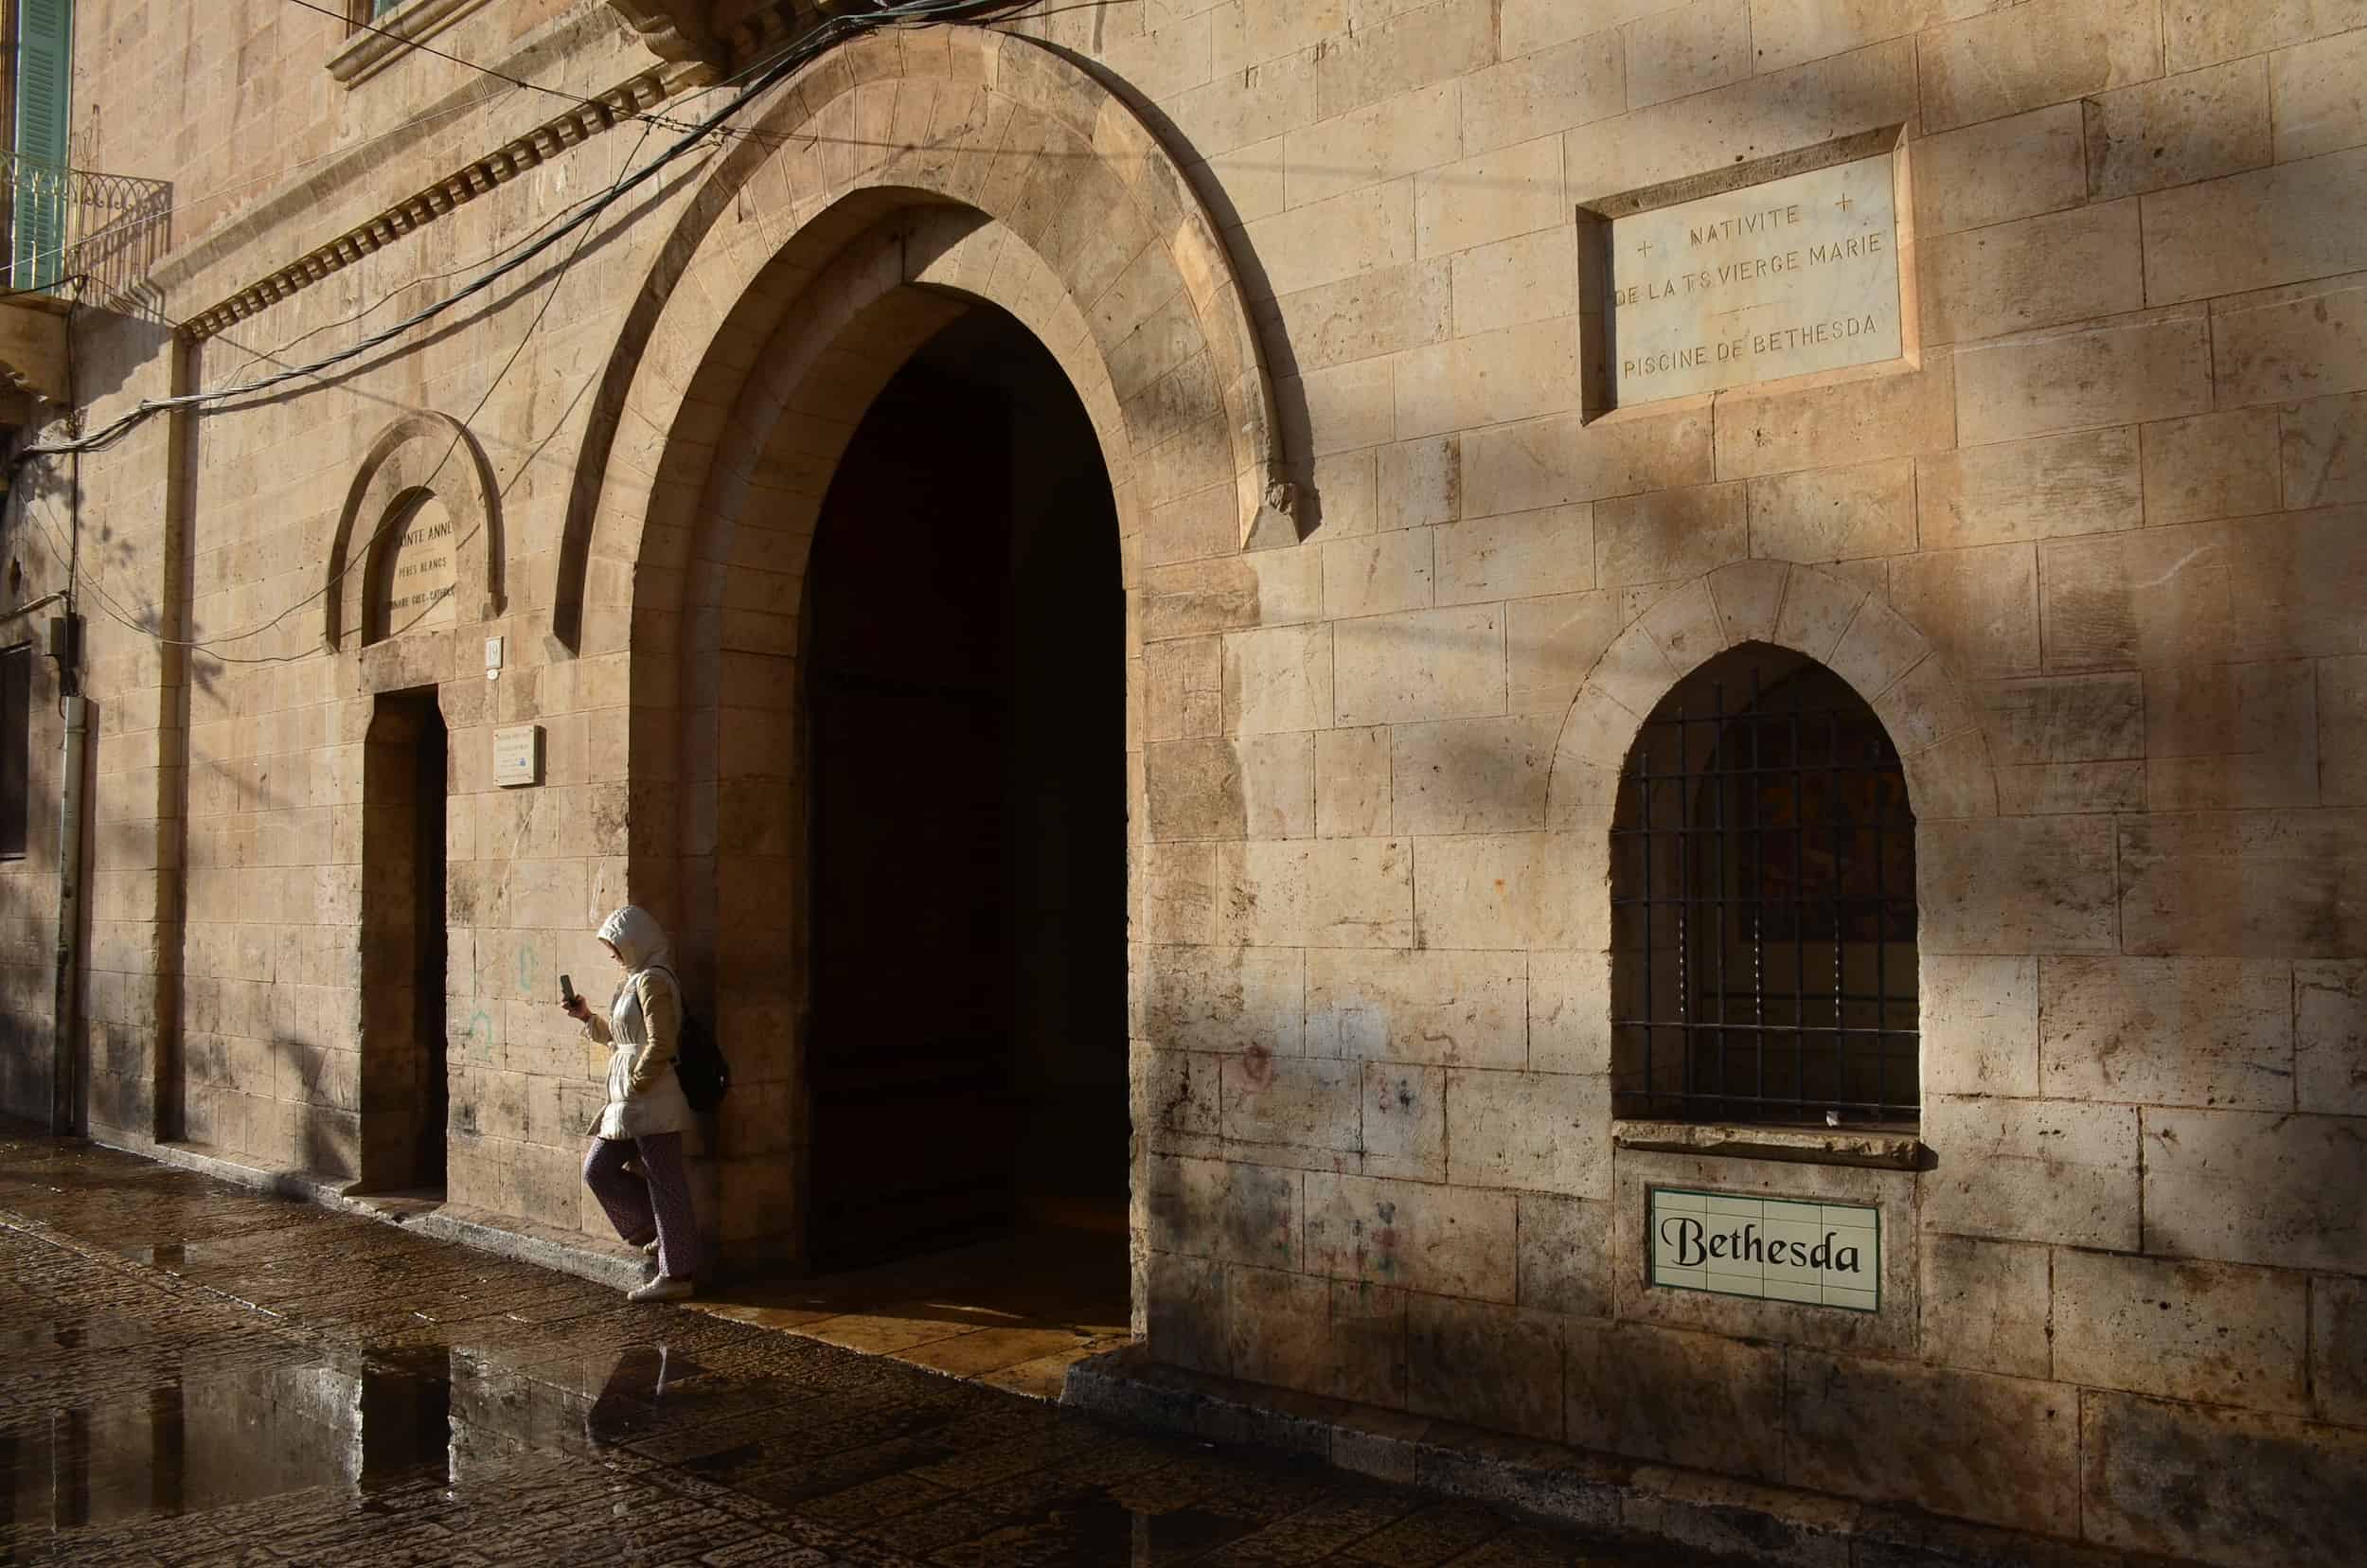 Entrance to the Church of Saint Anne complex in the Muslim Quarter of Jerusalem